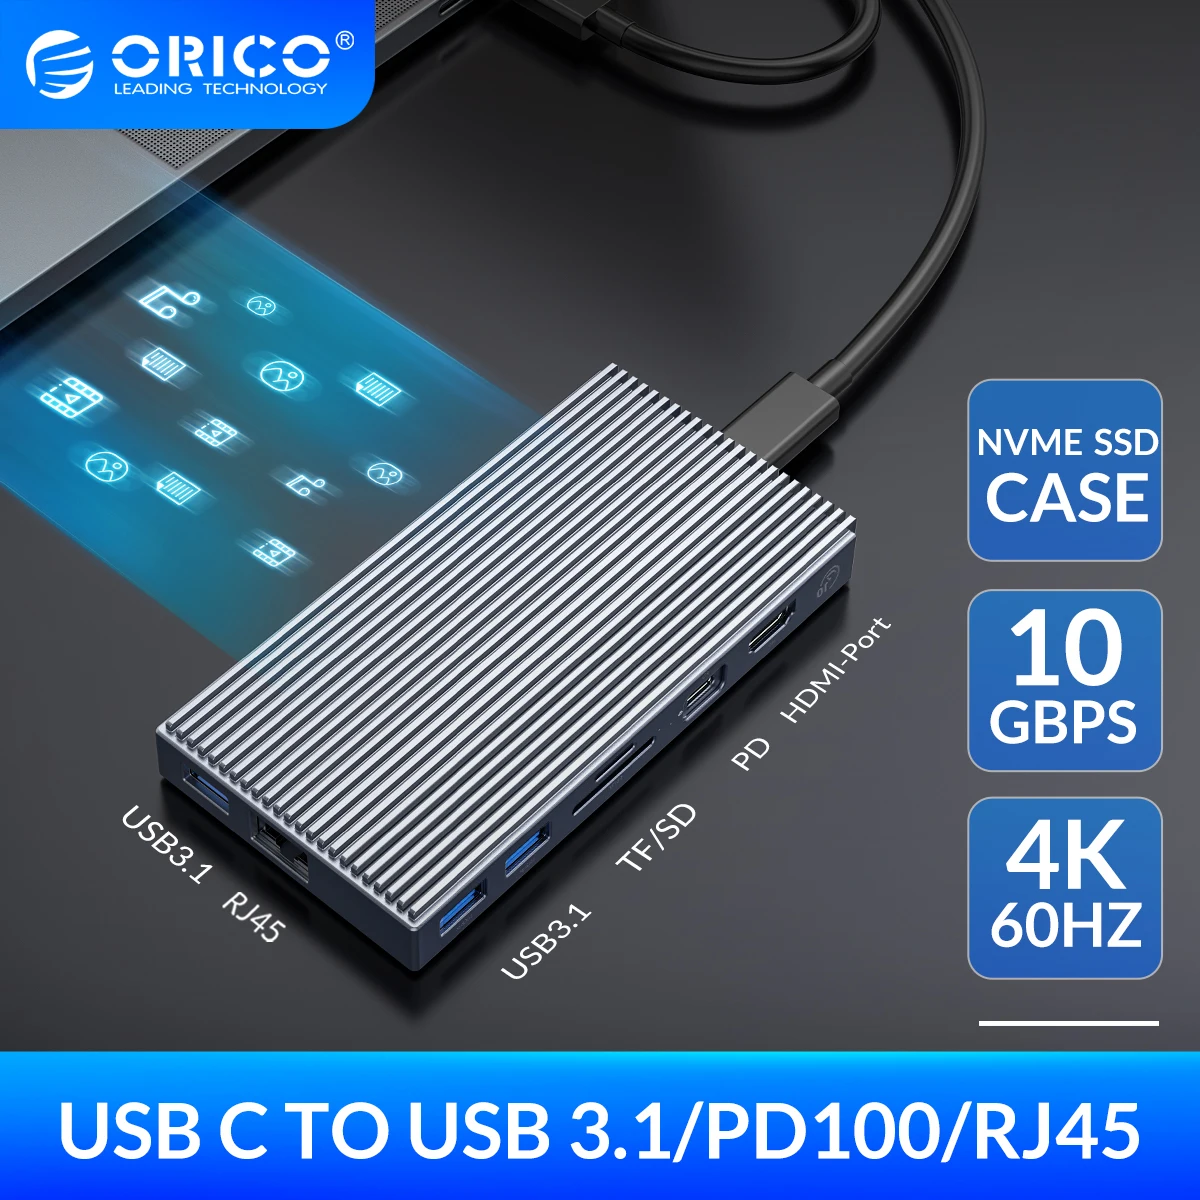 

ORICO USB C HUB with External M.2 NVMe SSD Enclosure to 4K60Hz USB 3.1 10Gbps PD100 Charging RJ45 Adapter Type-C Docking Station